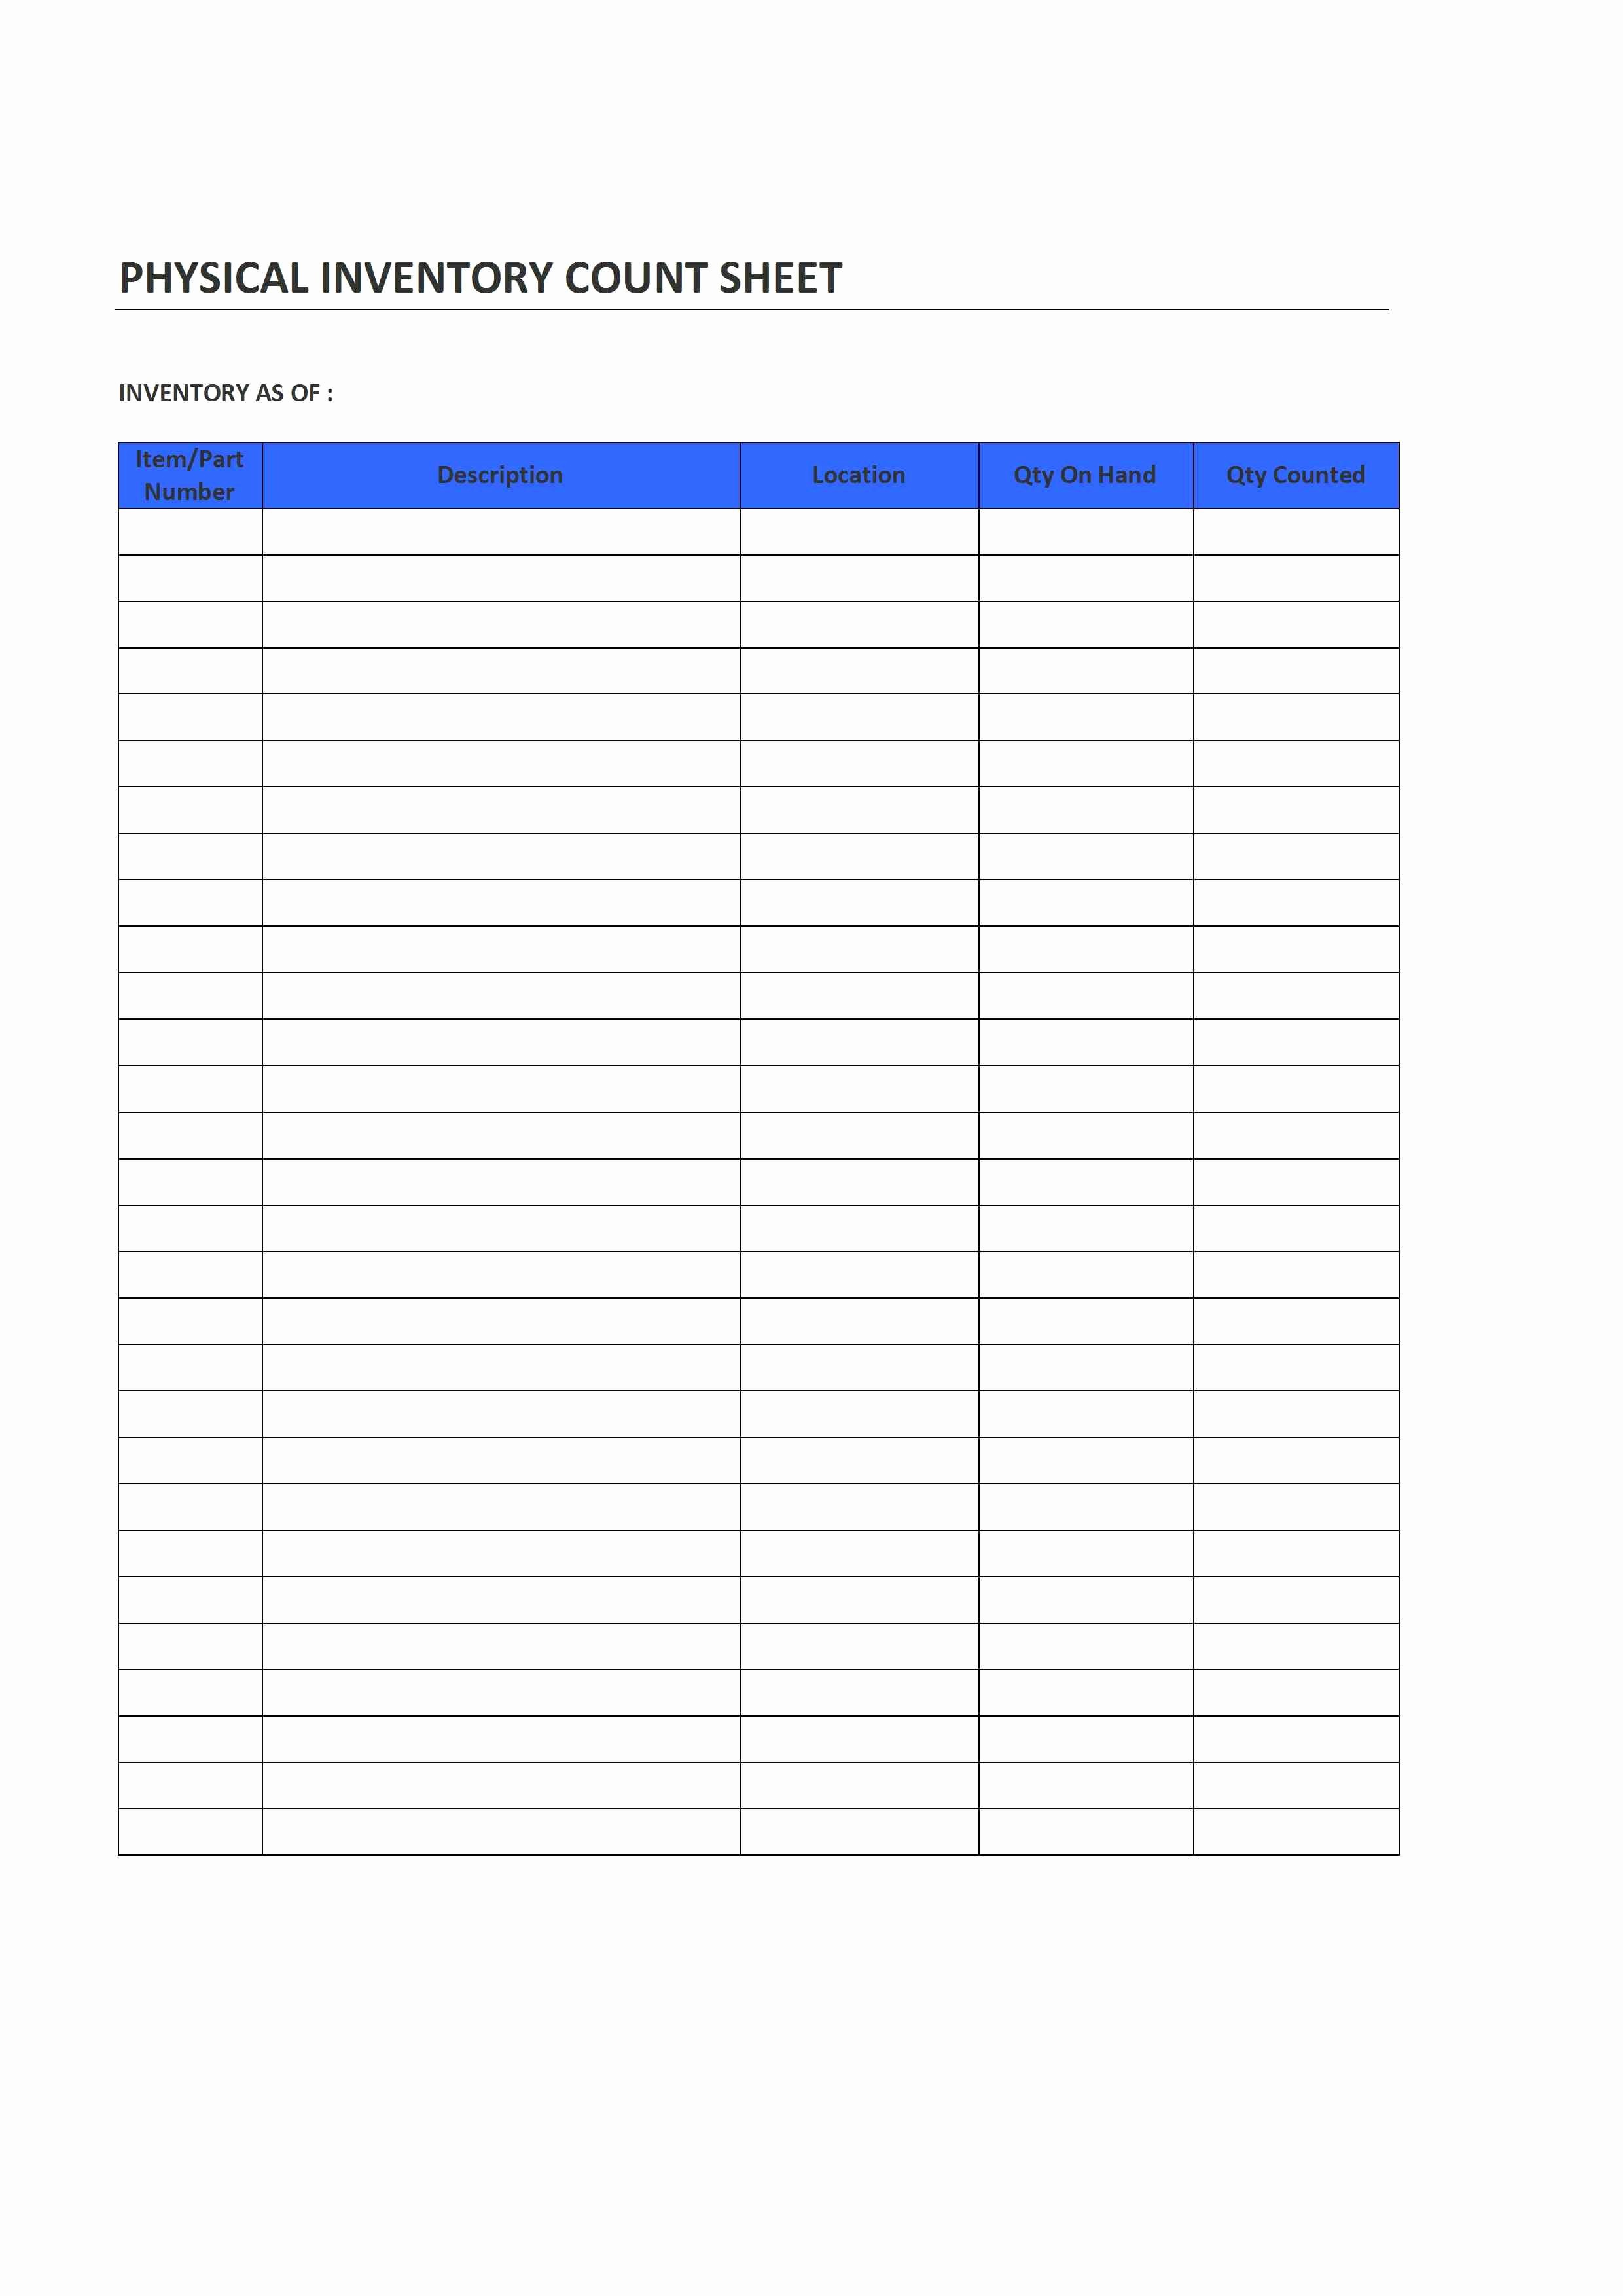 Physical Inventory Count Sheet Template Fresh Physical Inventory Count Sheet